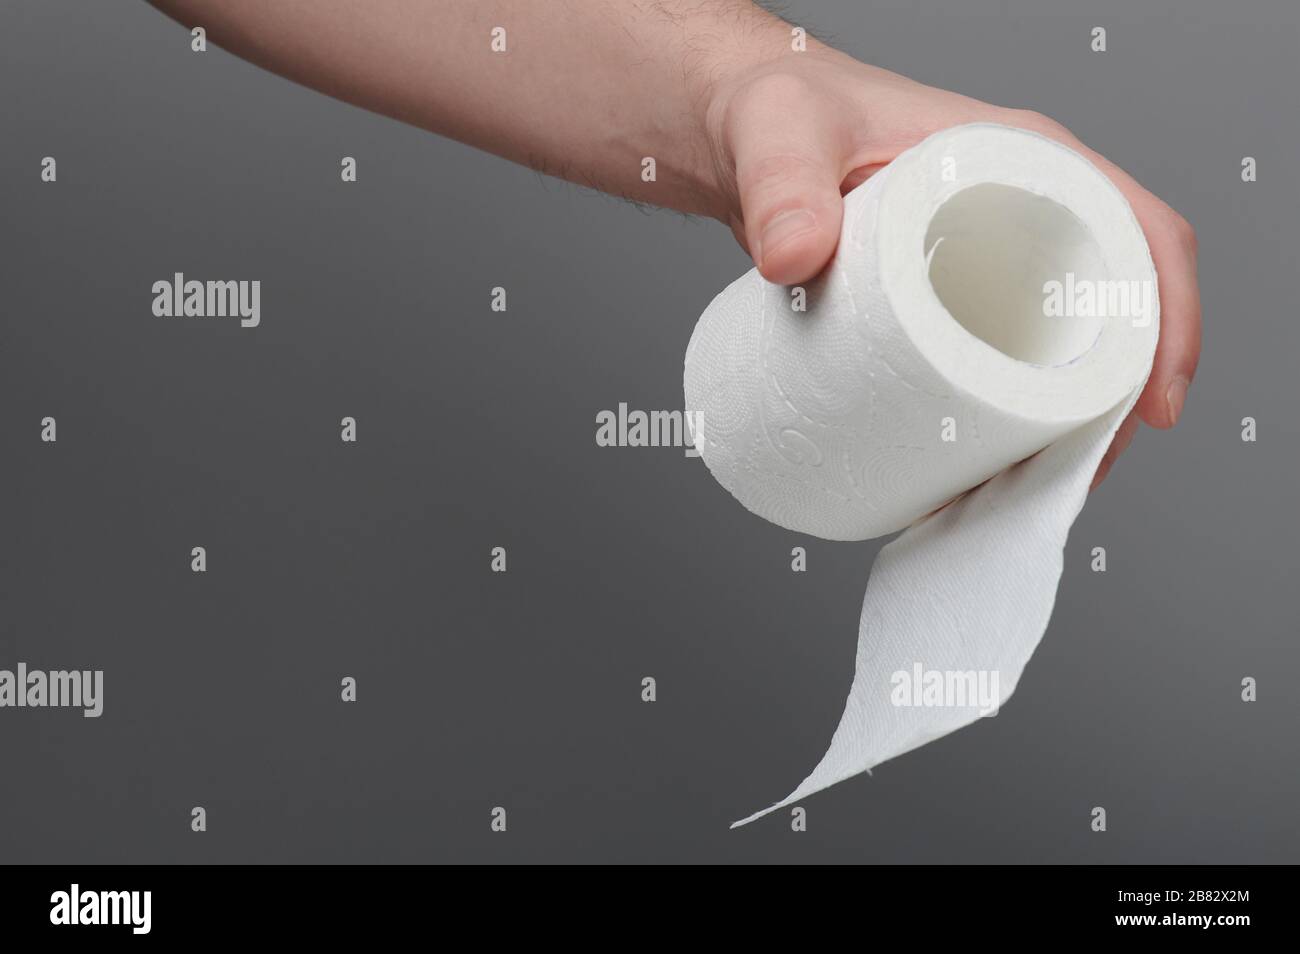 Hand hold small roll of toilet paper on gray background Stock Photo